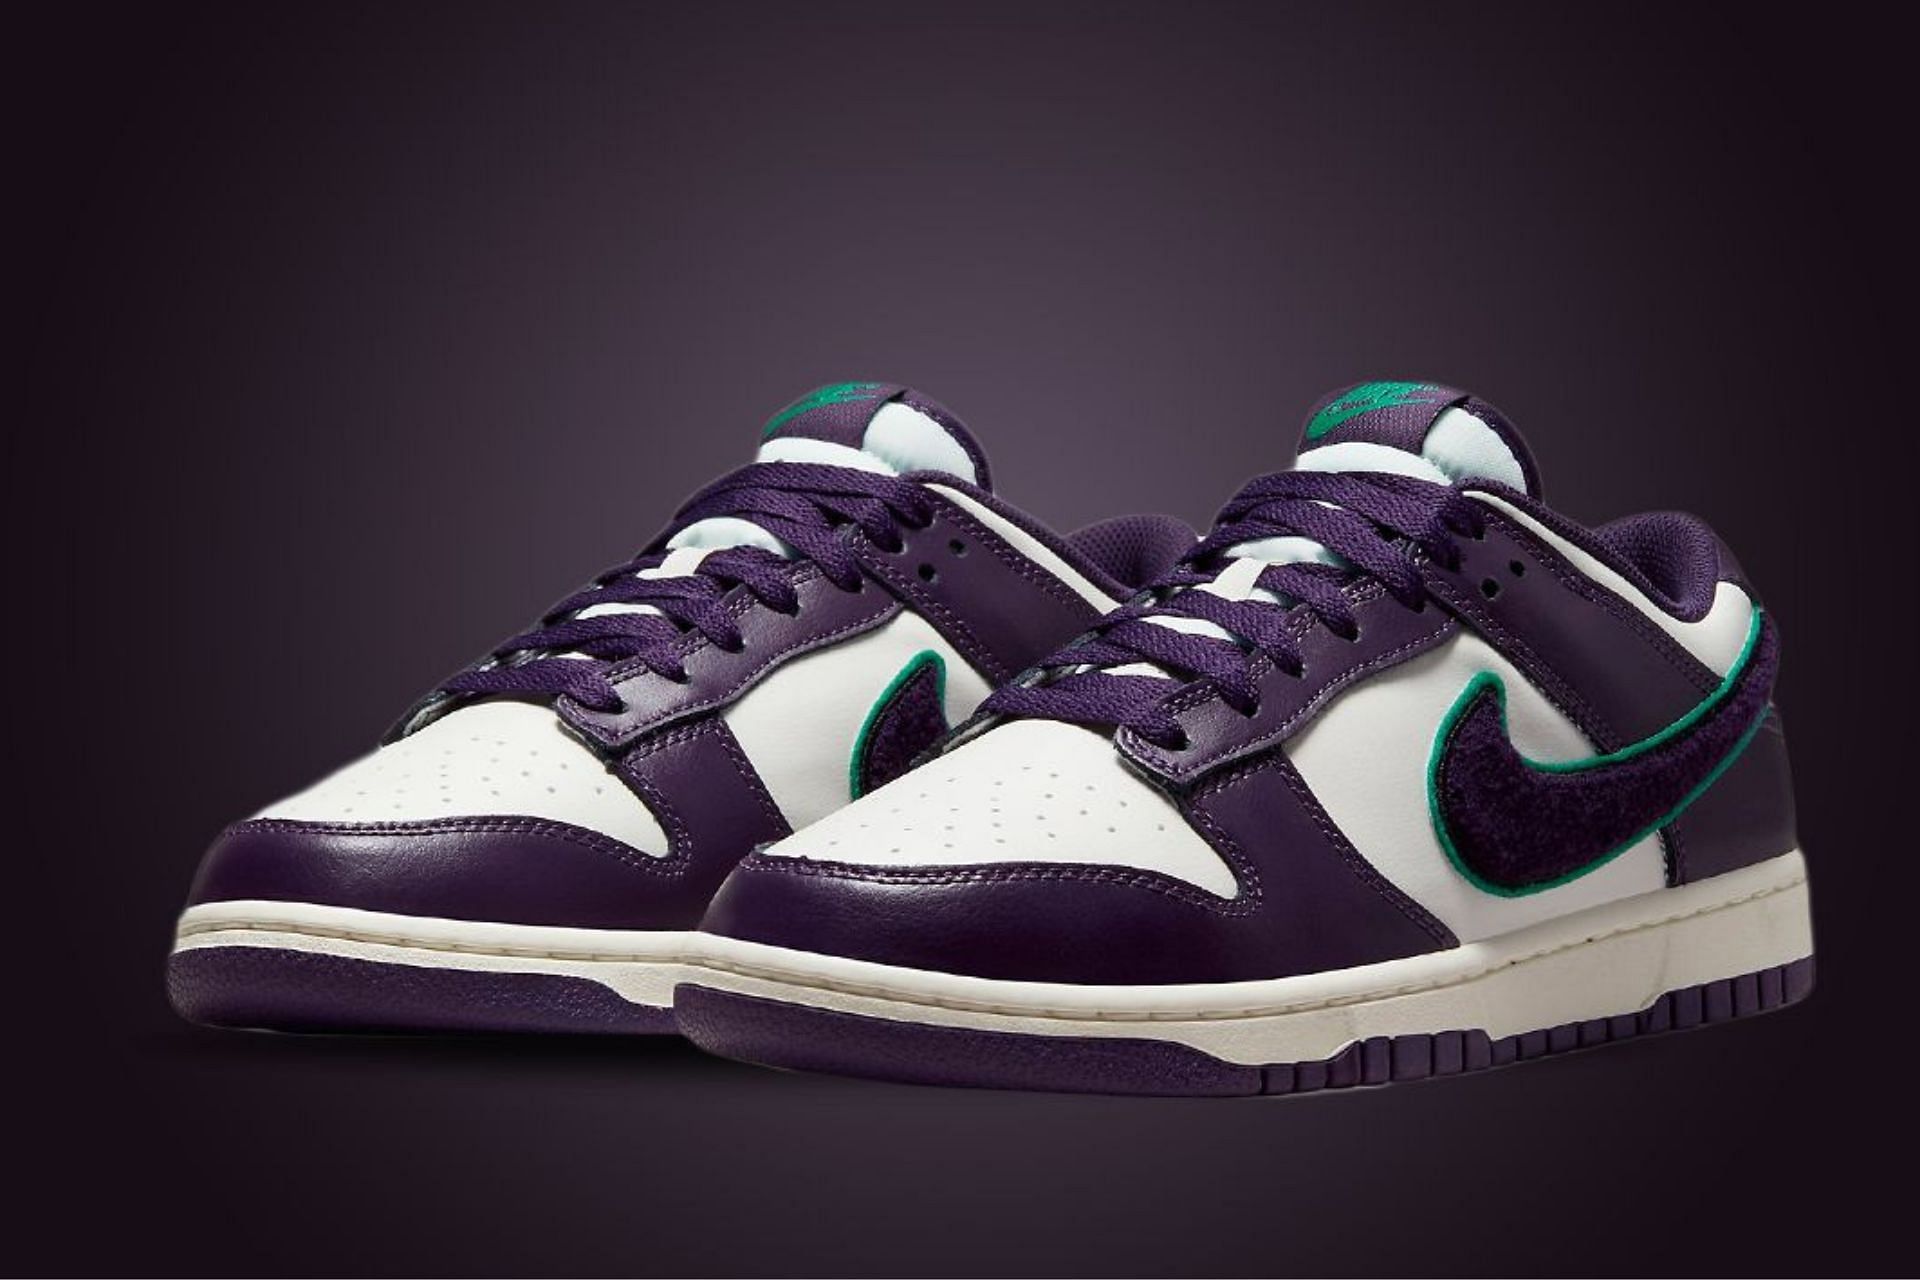 Where to buy Nike Dunk Low University “Grand Purple” shoes? Price